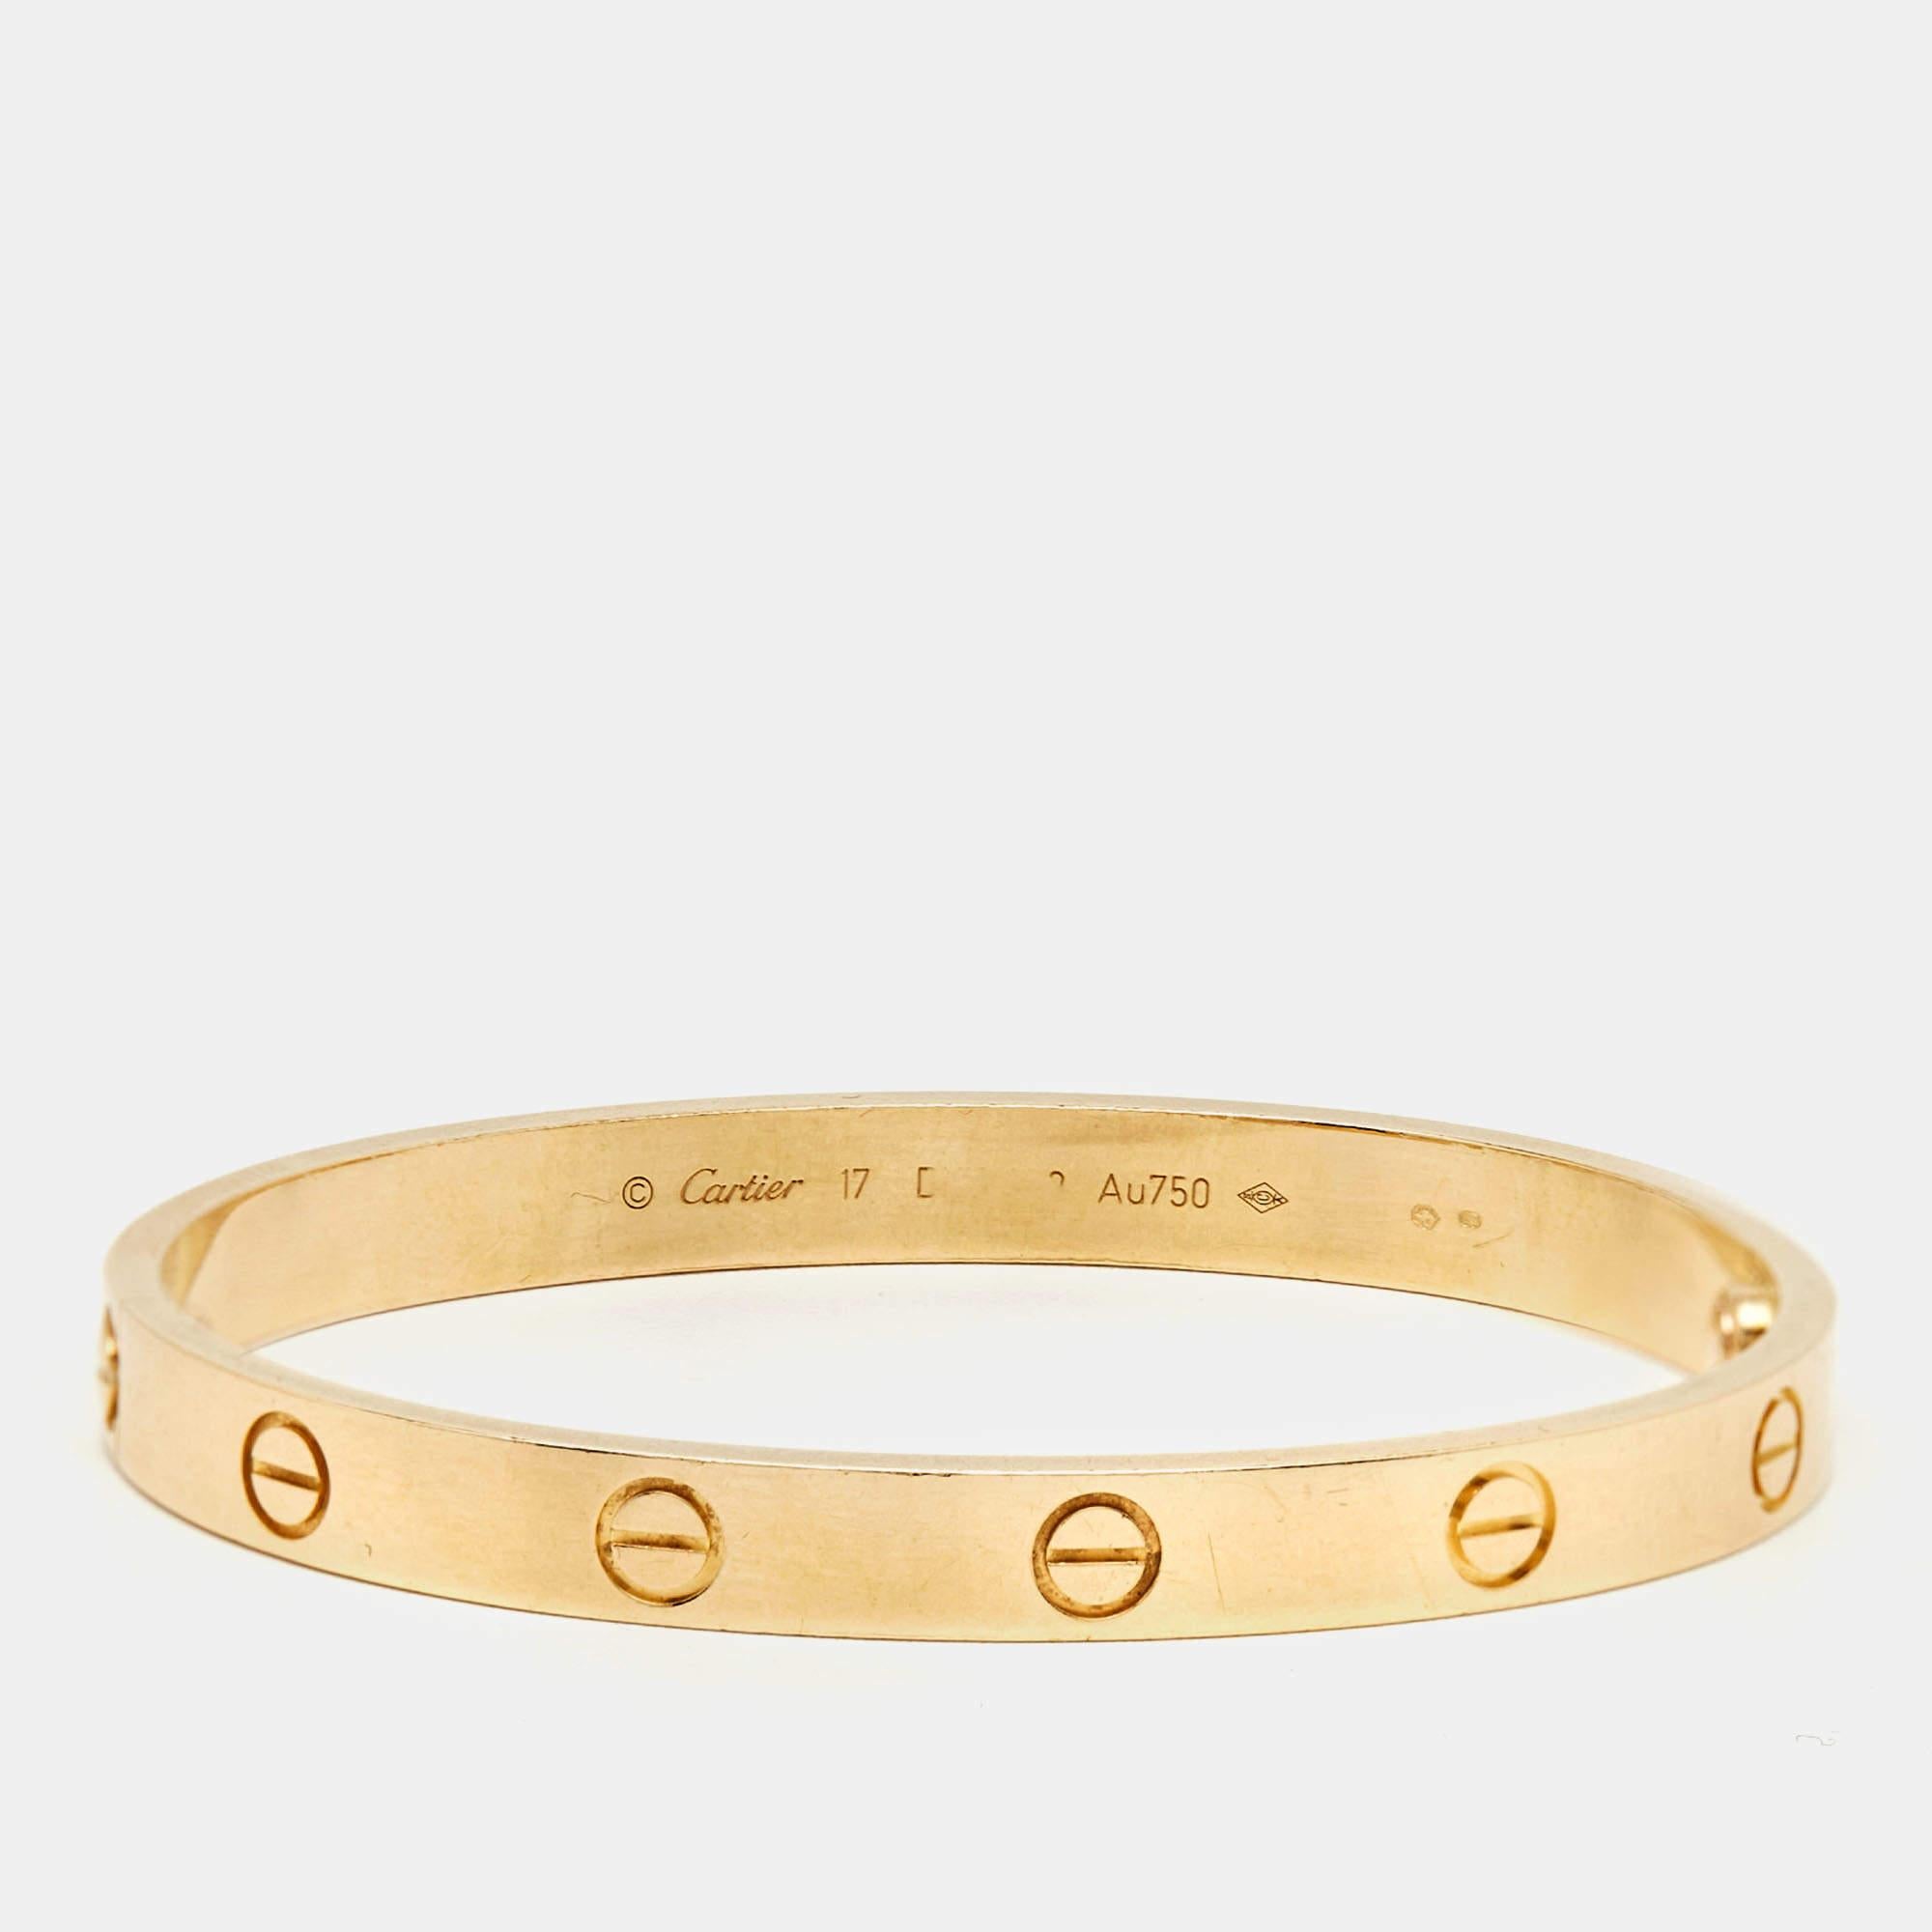 Crafted with exquisite finesse, the Cartier Love bracelet epitomizes timeless elegance. Its sleek design seamlessly blends luxury with simplicity, showcasing Cartier's renowned craftsmanship. The iconic screw motifs symbolize eternal love and